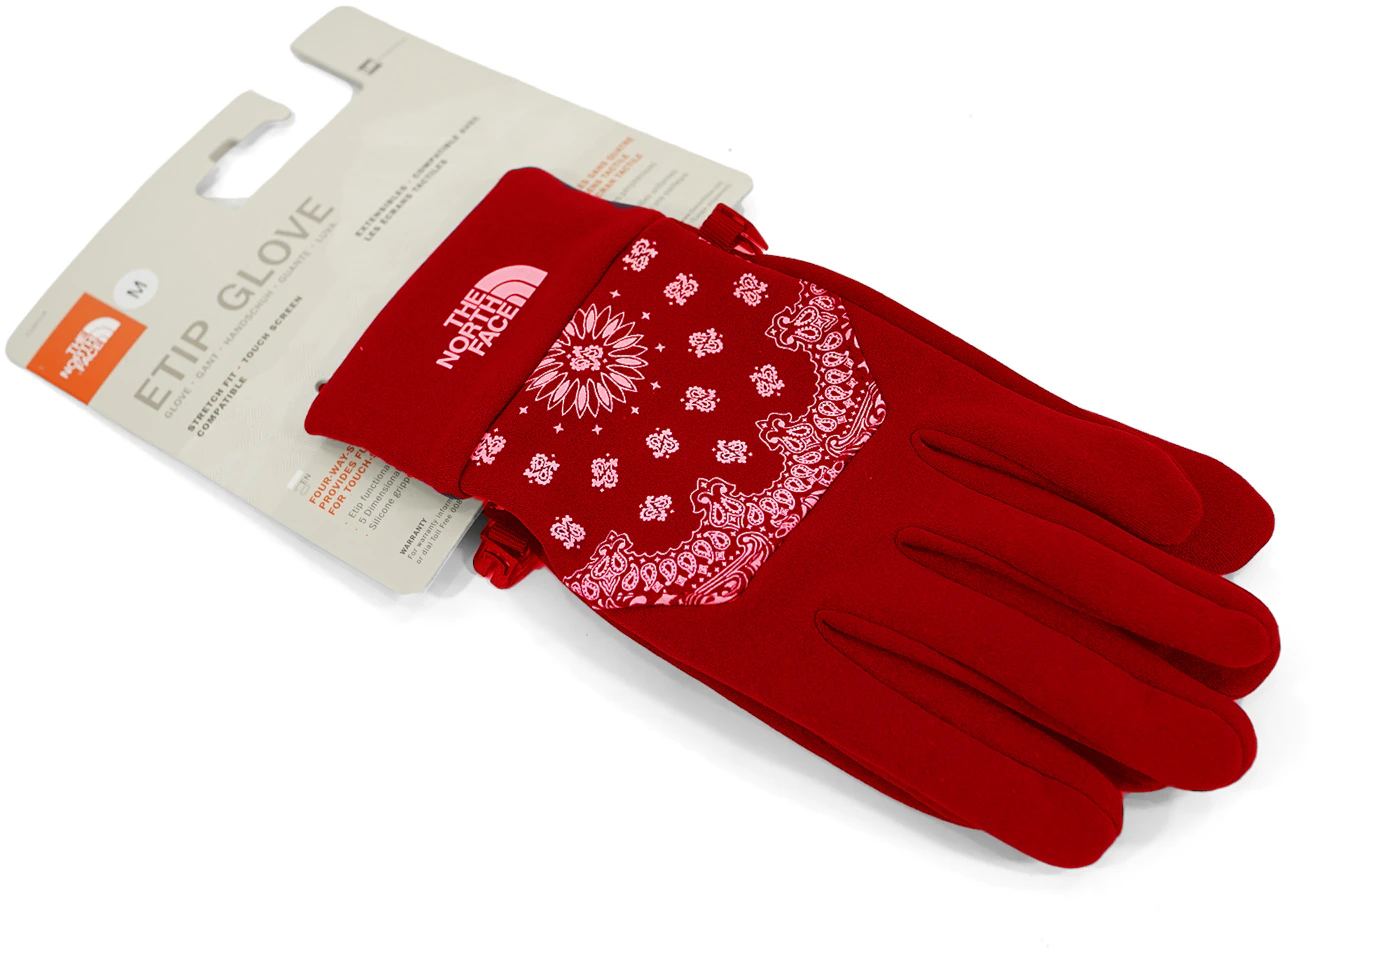 Bandana US Supreme Gloves - The - North FW14 Men\'s Red Face